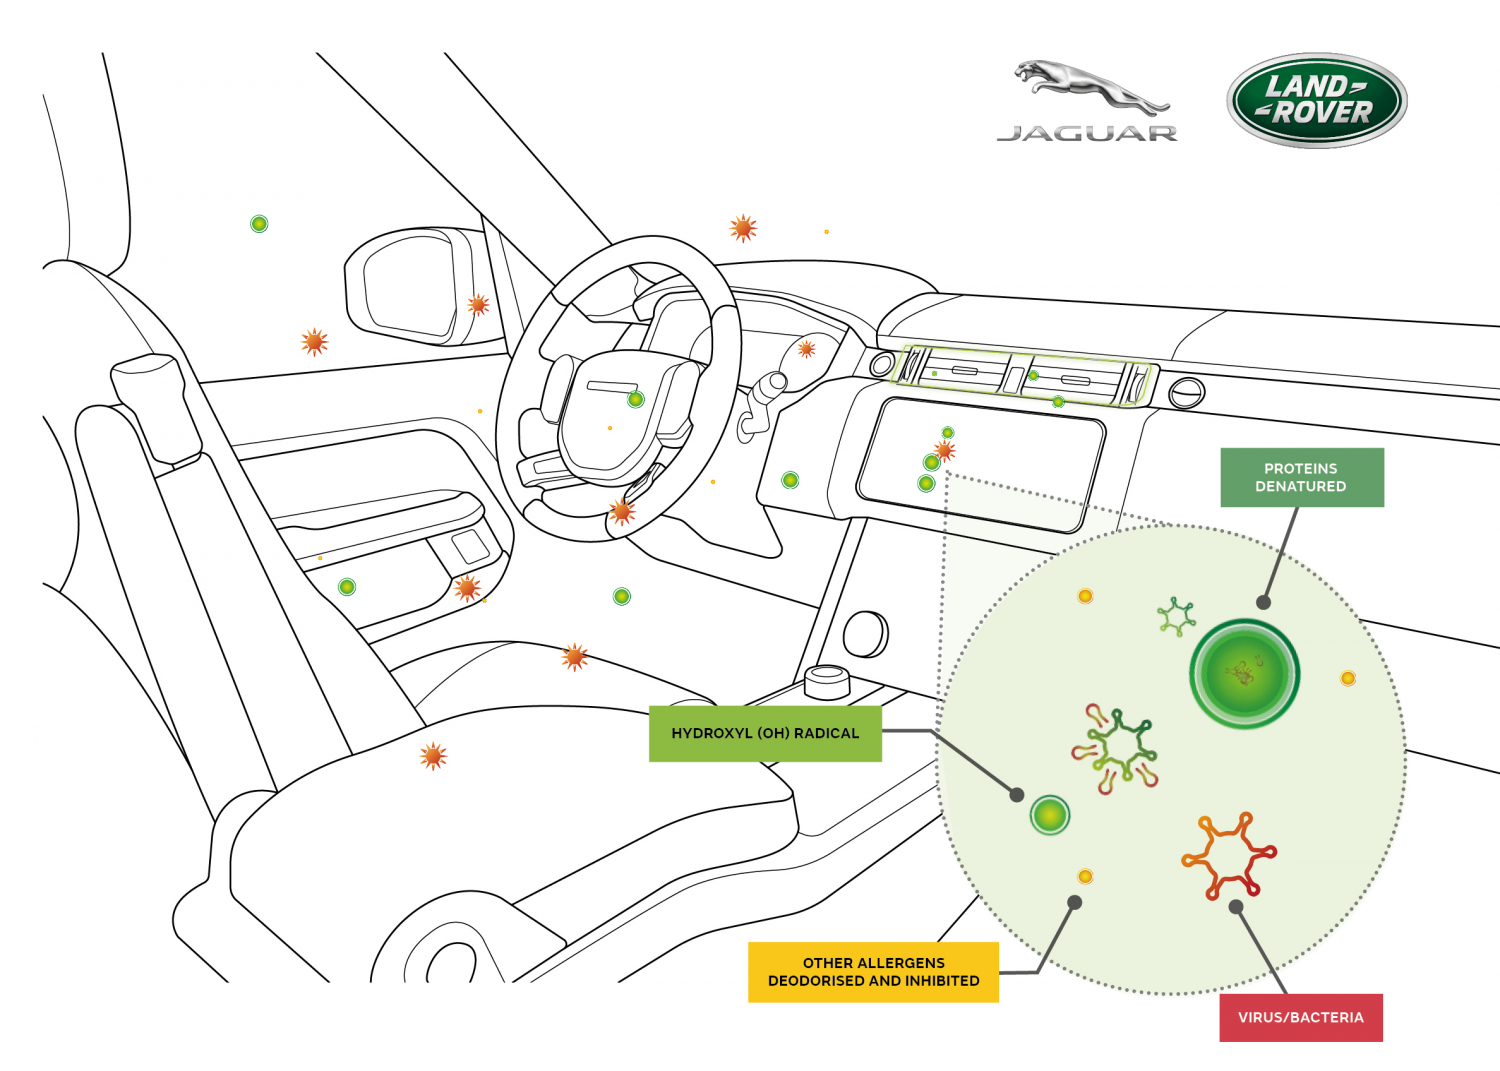 Jaguar Land Rover’s air purification technology inhibits viruses and bacteria by 97%